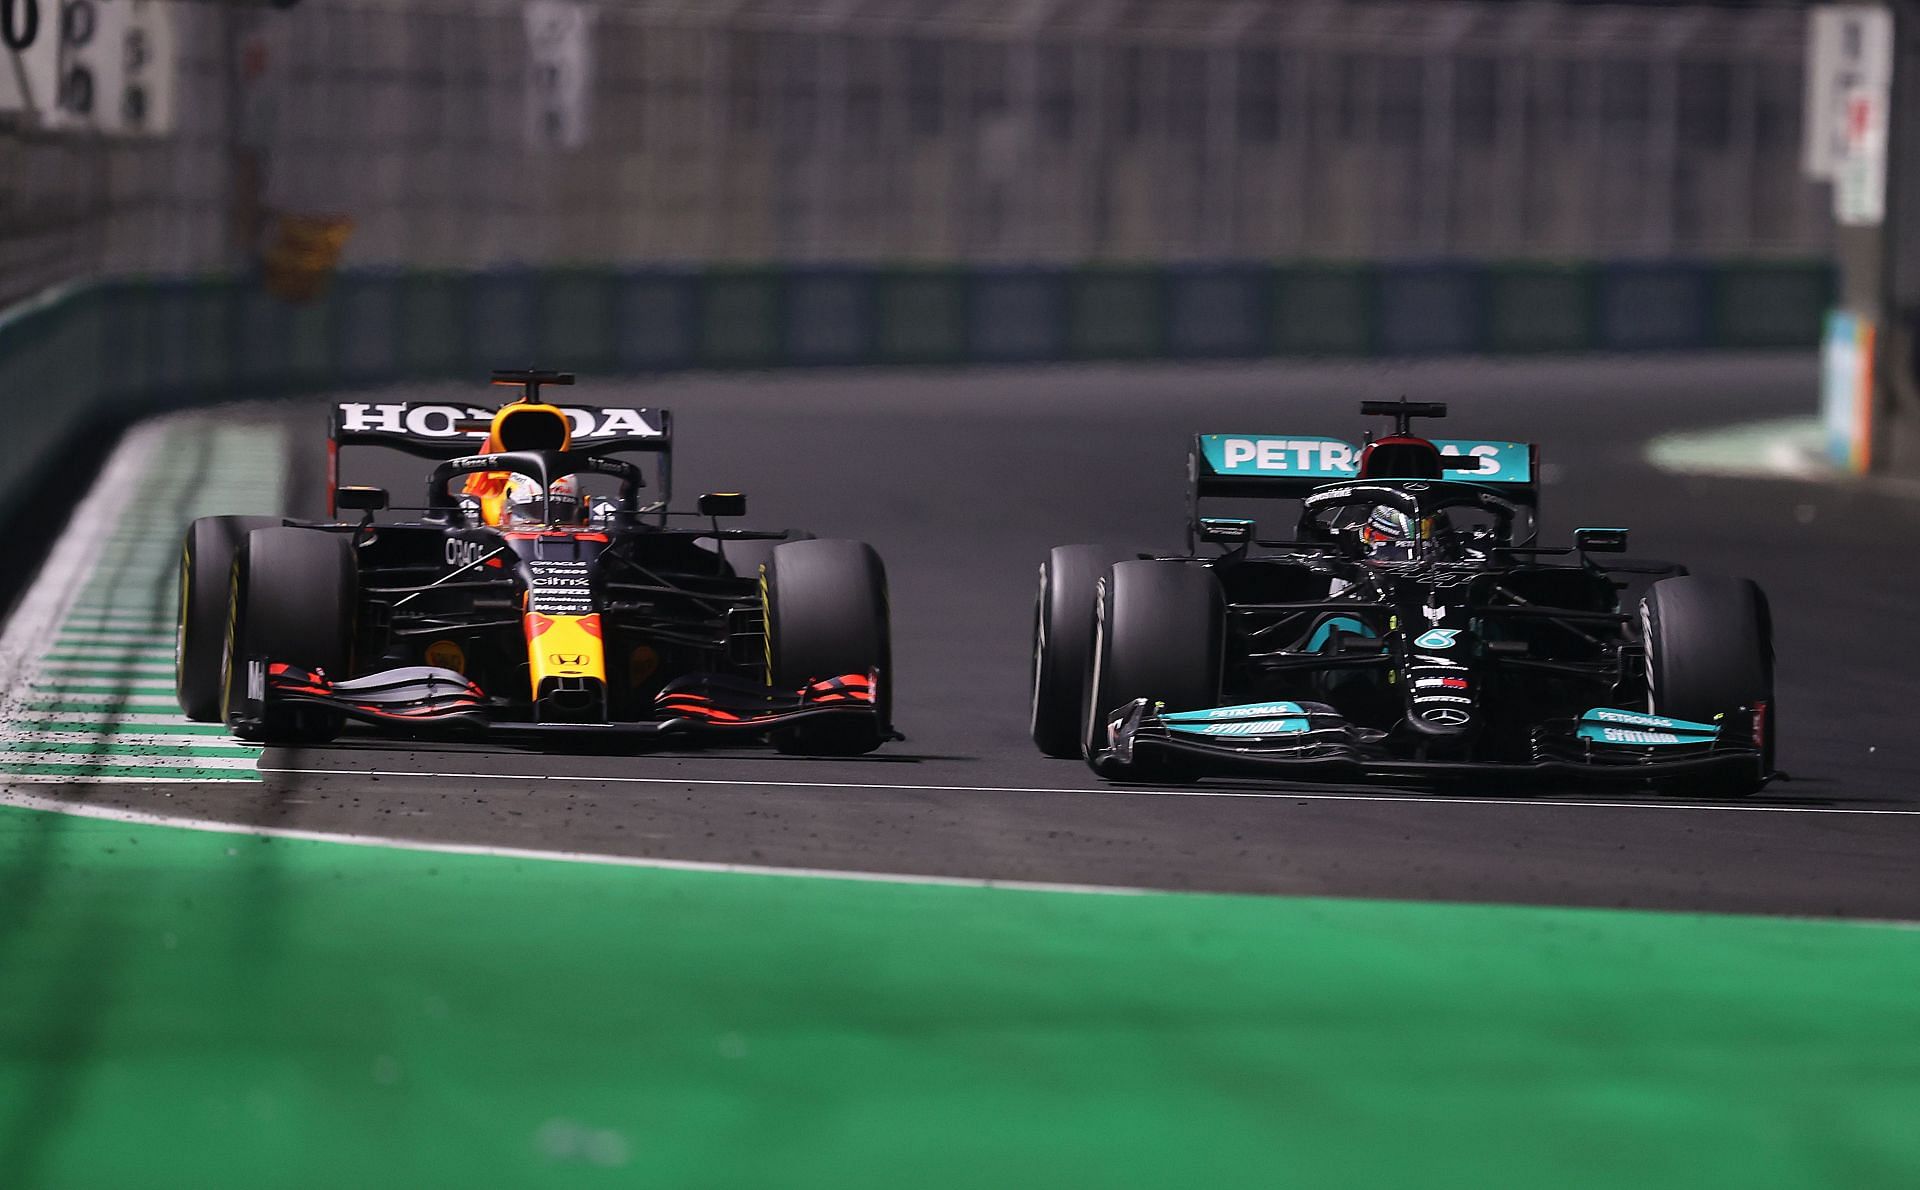 Lewis Hamilton and Max Verstappen following the controversial clash at the 2021 Saudi Arabian Grand Prix